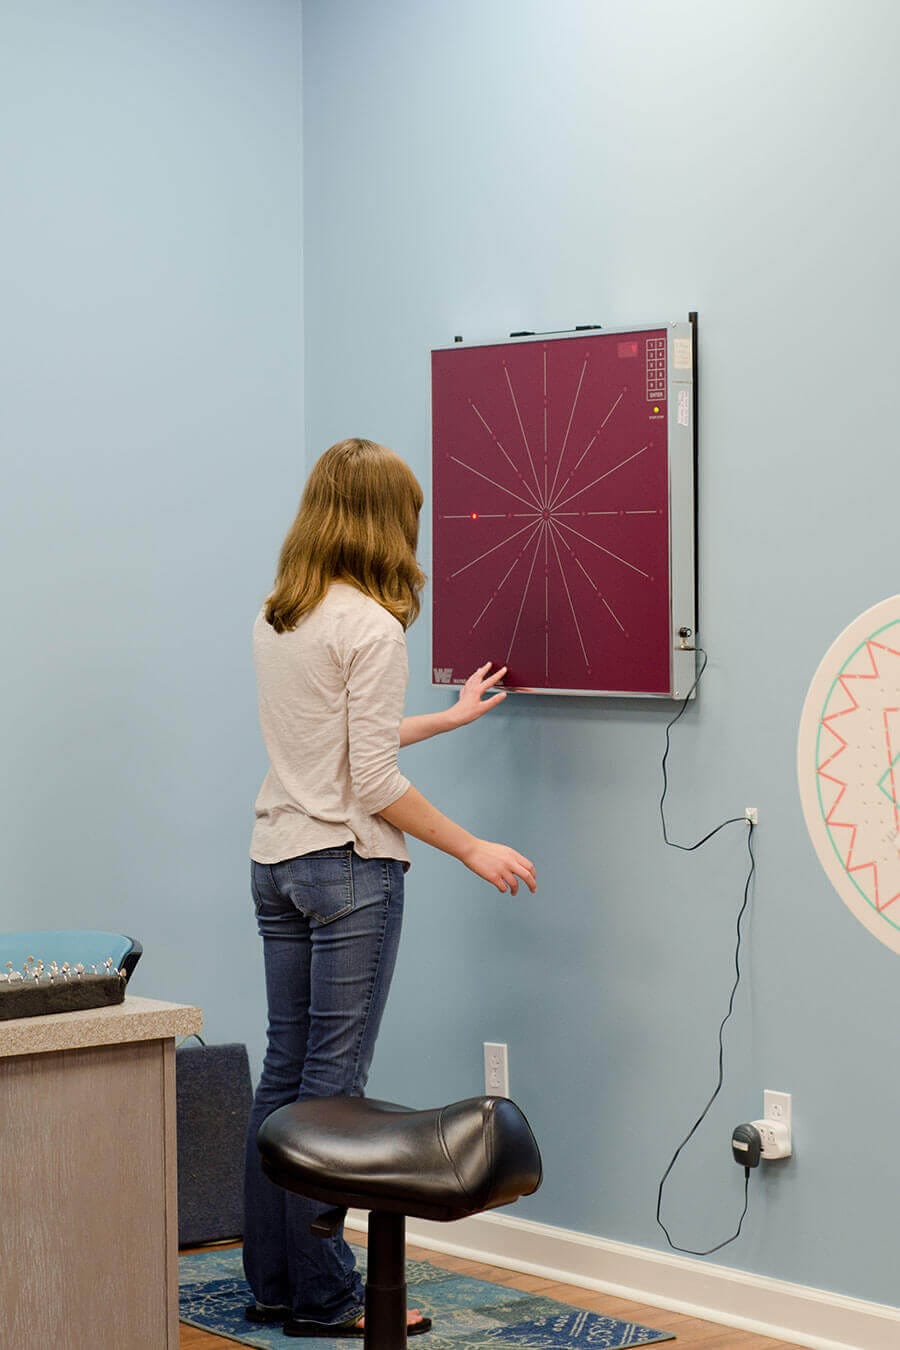 Did You Know That Vision Therapy Can Help Treat Neurological Conditions? Optometrist